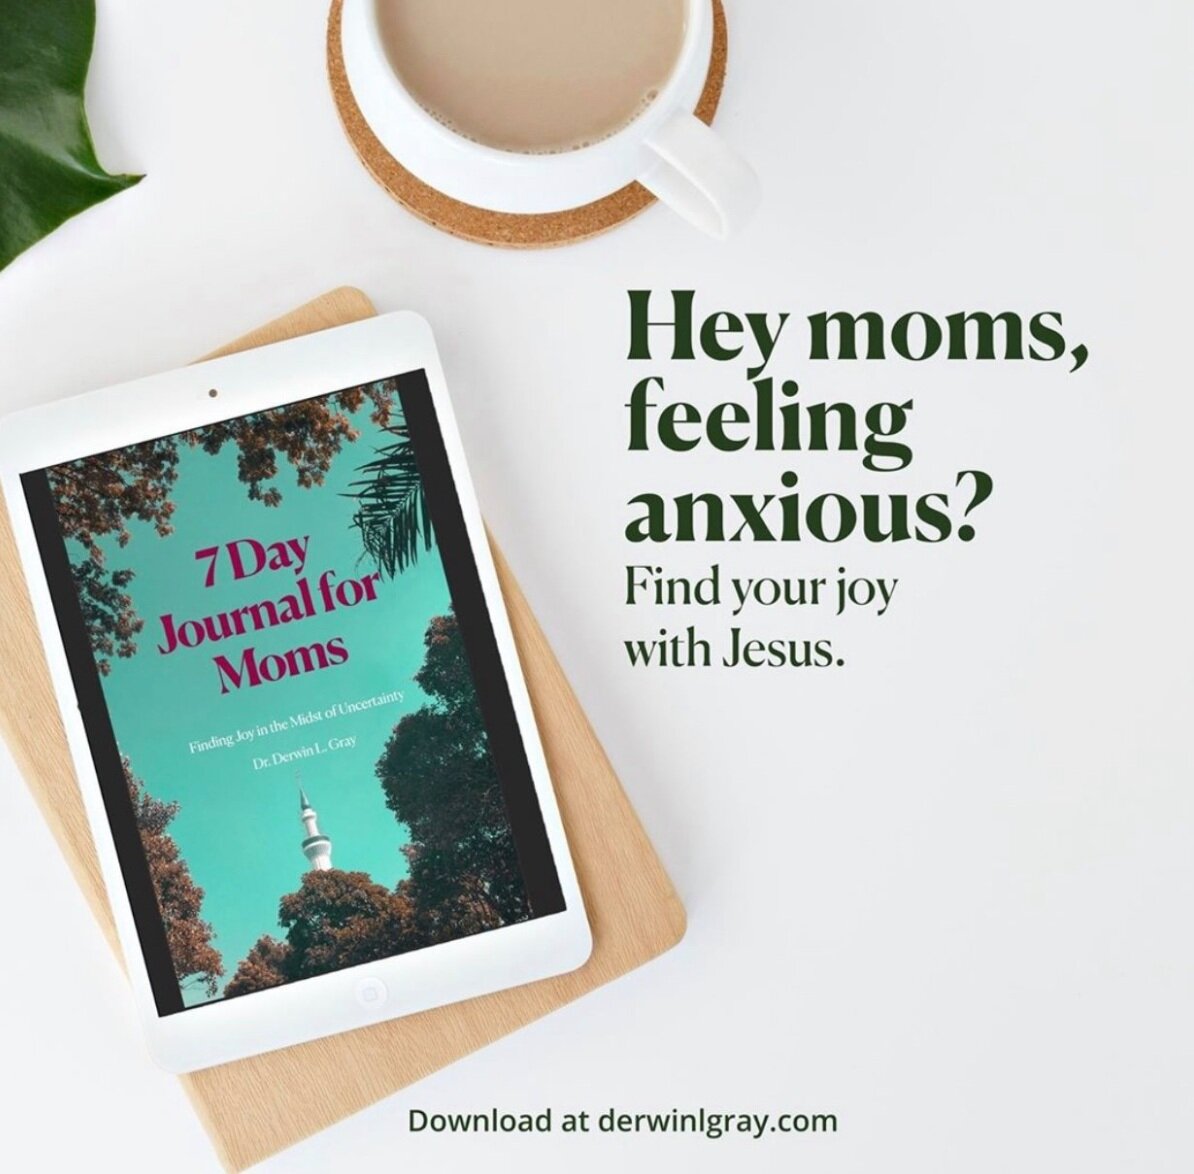 7 Day Journal for Moms